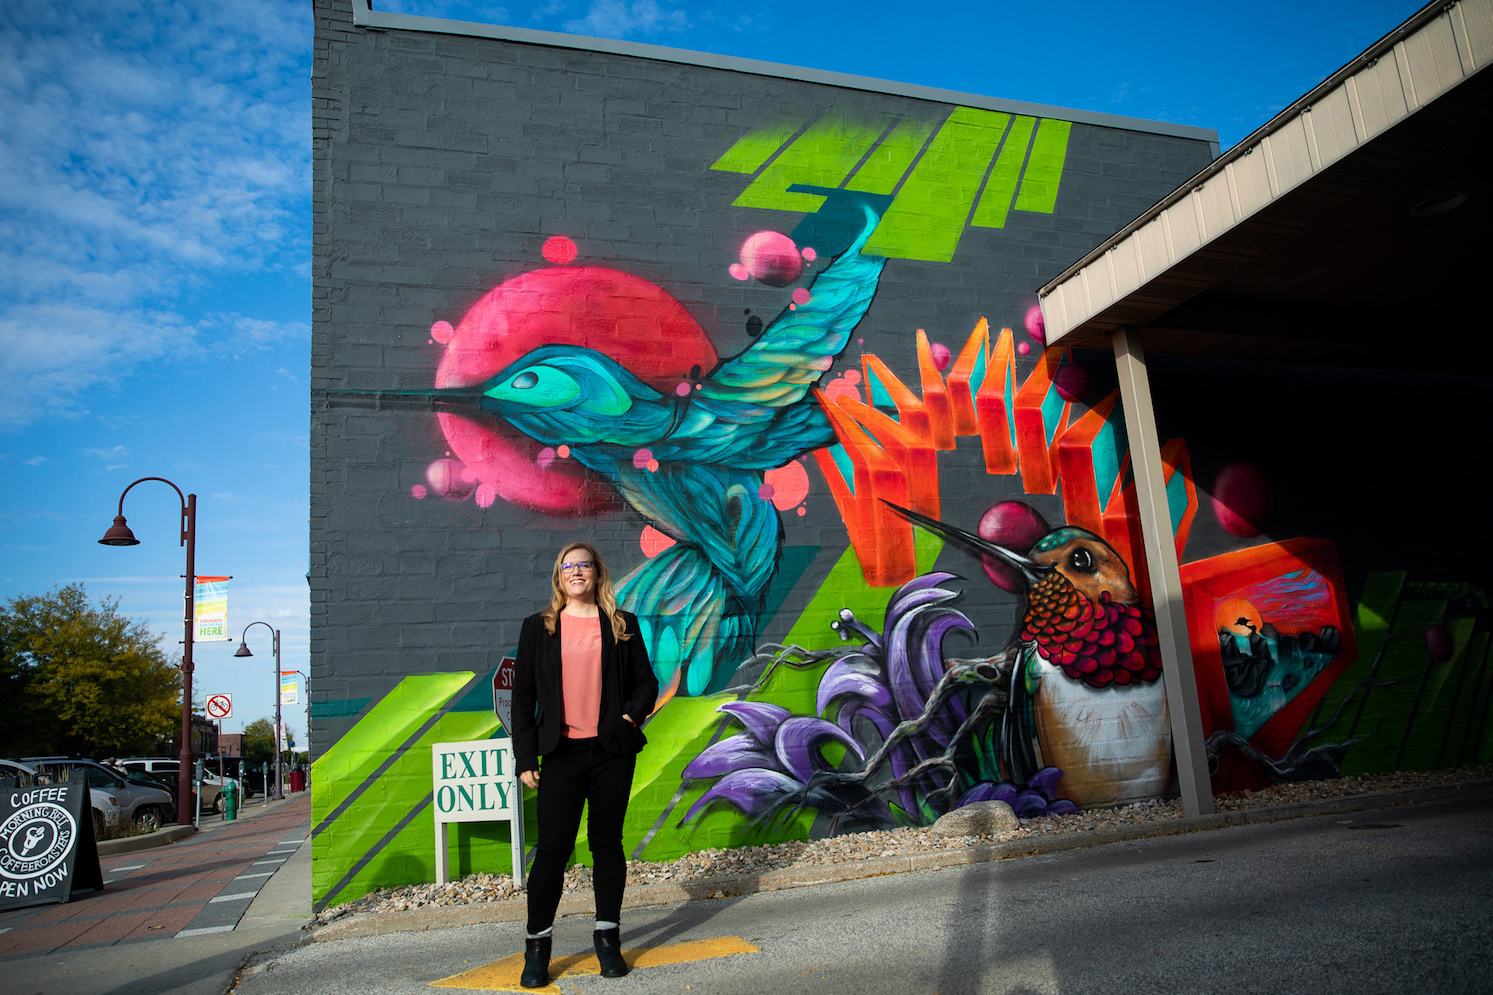 Dara Wald in front of colorful mural